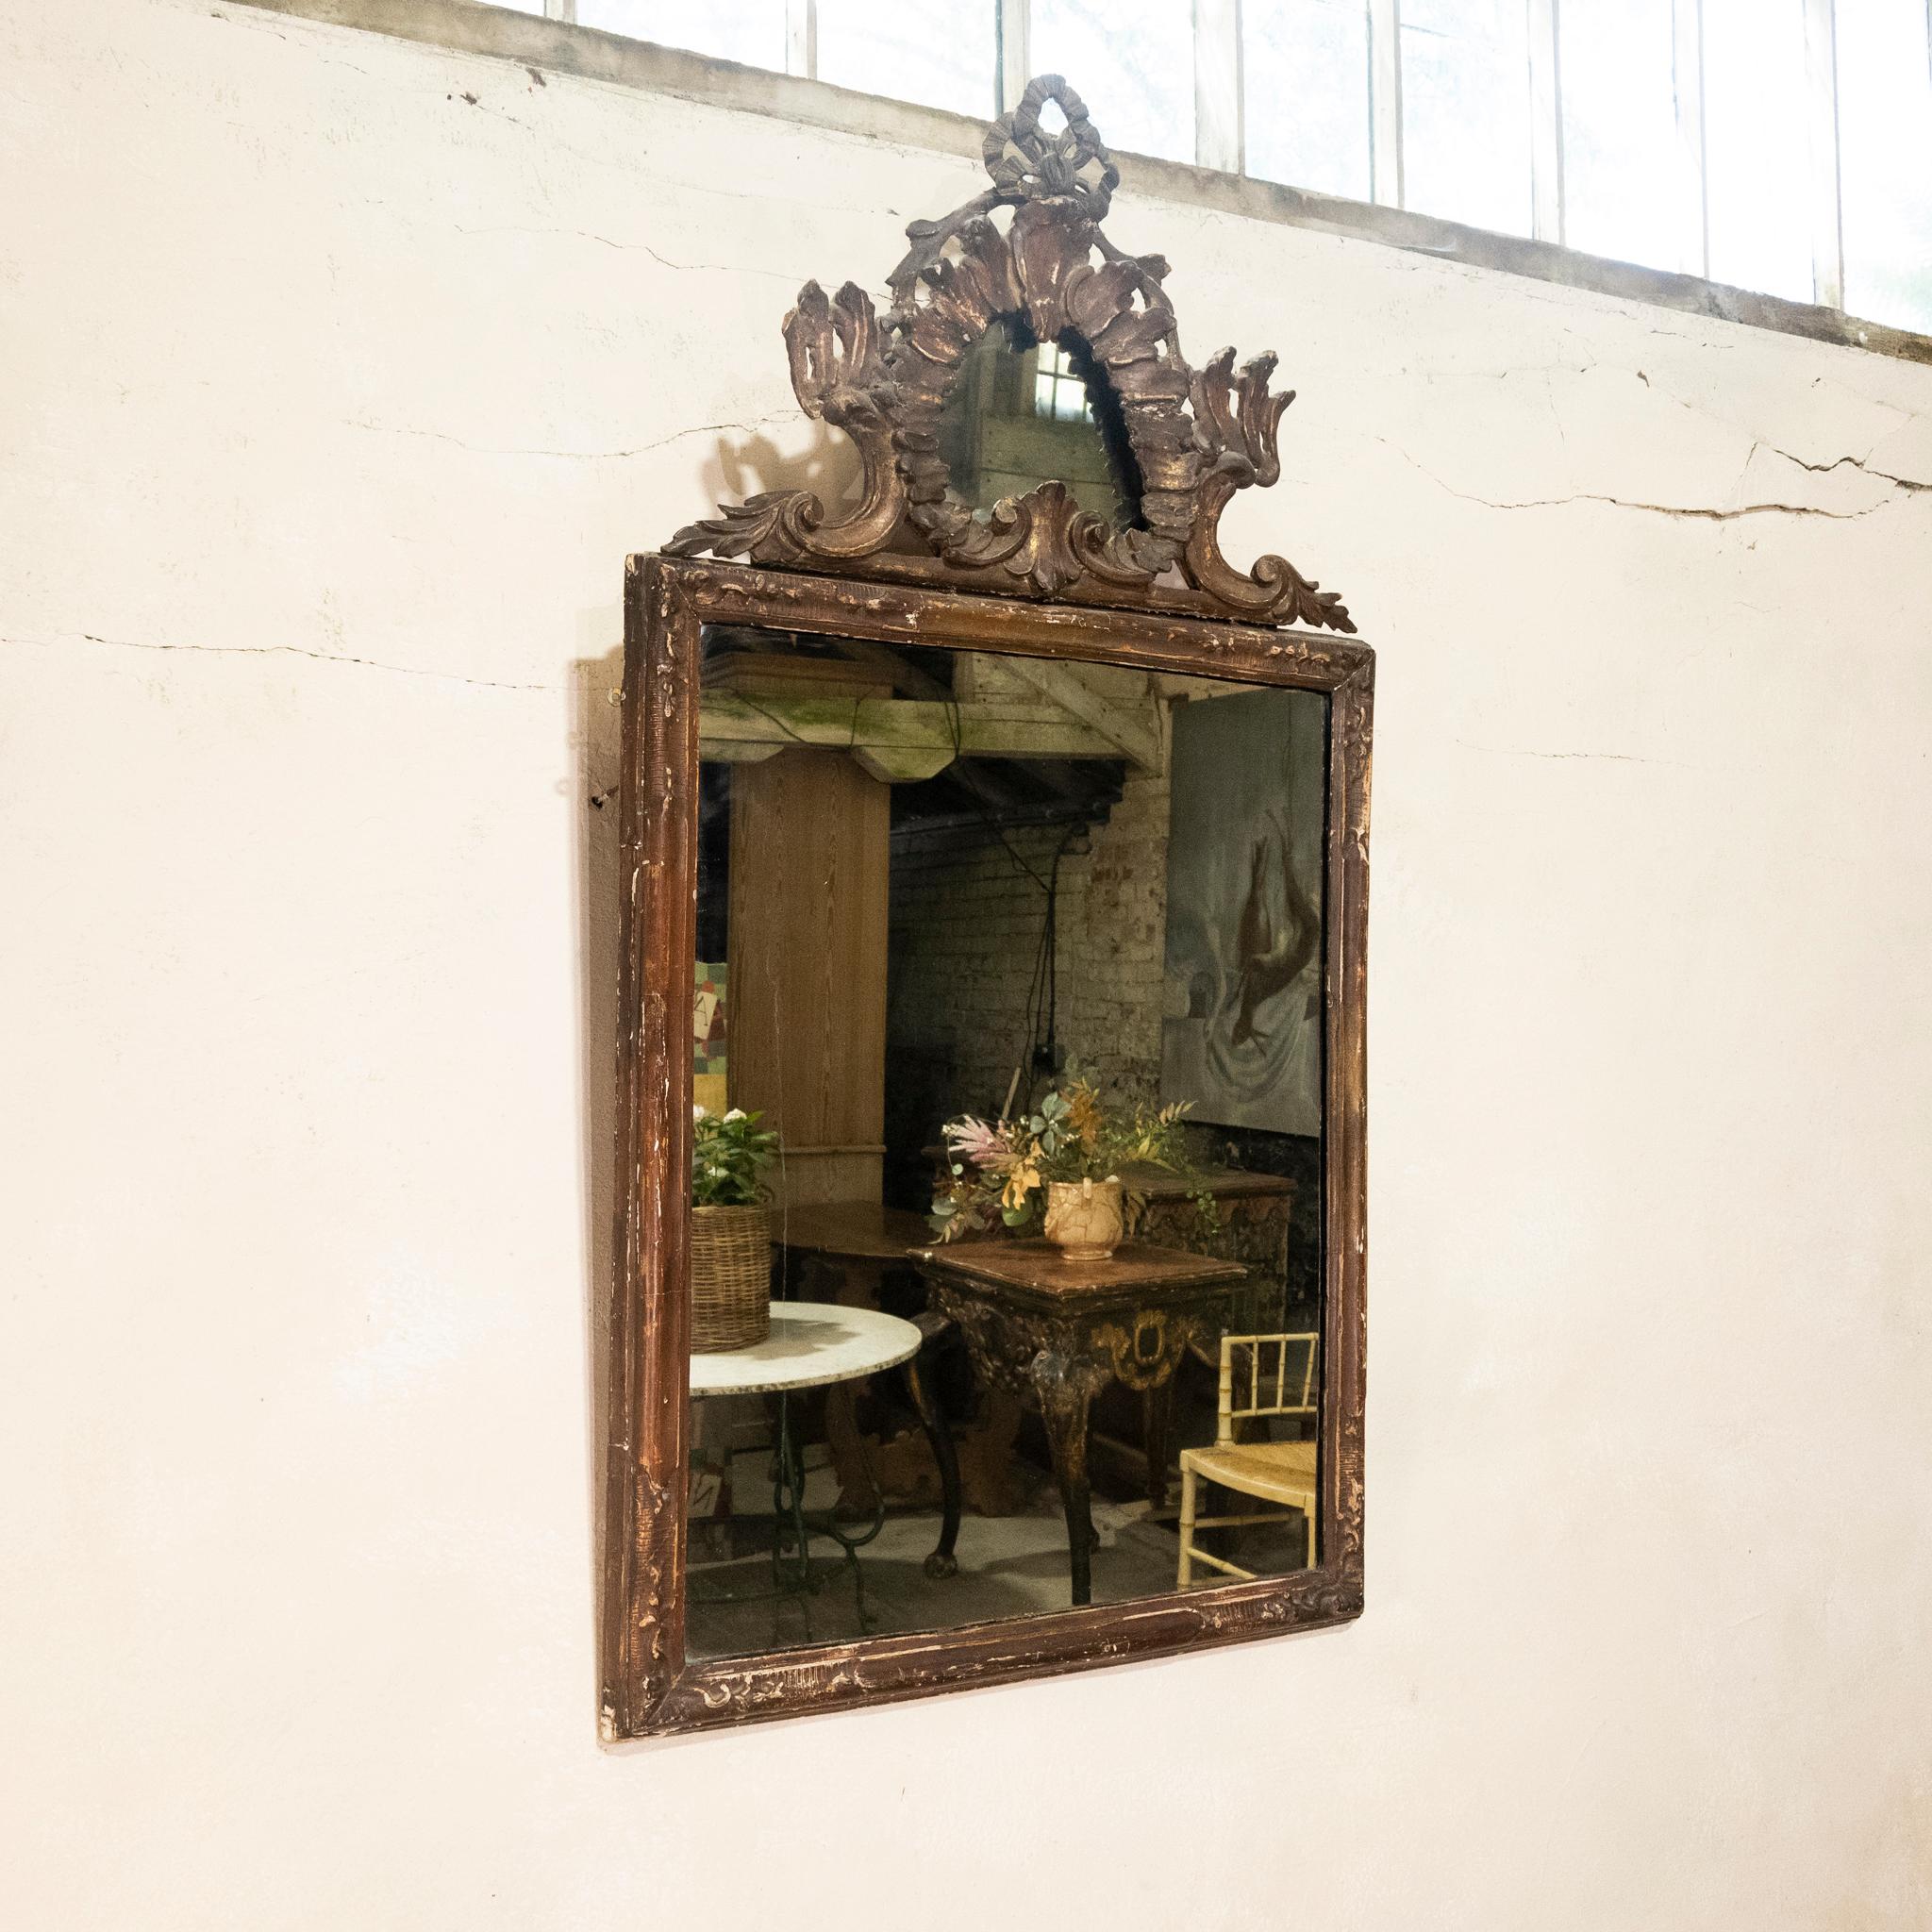 A remarkable 18th-century Italian Rococo period mirror.  Displaying a carved giltwood, and original painted rectangular bead-and-bar frame.  surmounted by a pierced pediment of a round mirror plate and ribbons, supported by C-scrolls. Husking and